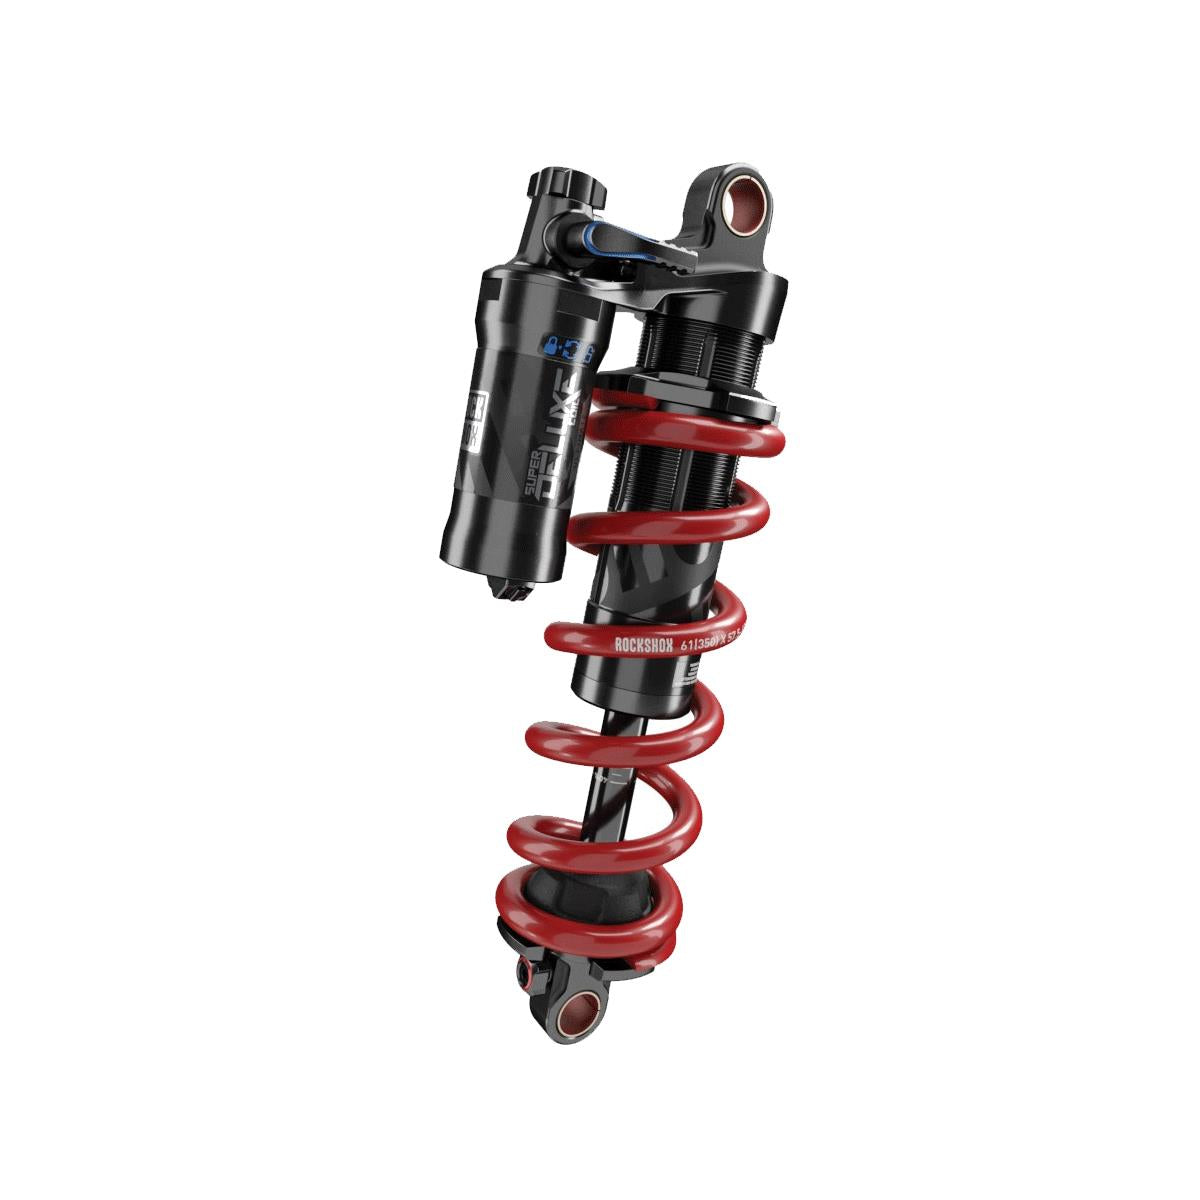 Rockshox Rear Shock Super Deluxe Ultimate Coil Rct (205x65) Lreb/lcomp, 320lb Lockoutforce, Standard Trunnion (Includes 8x25 Mounting Hardware) 2018+ Transition Patrol V2